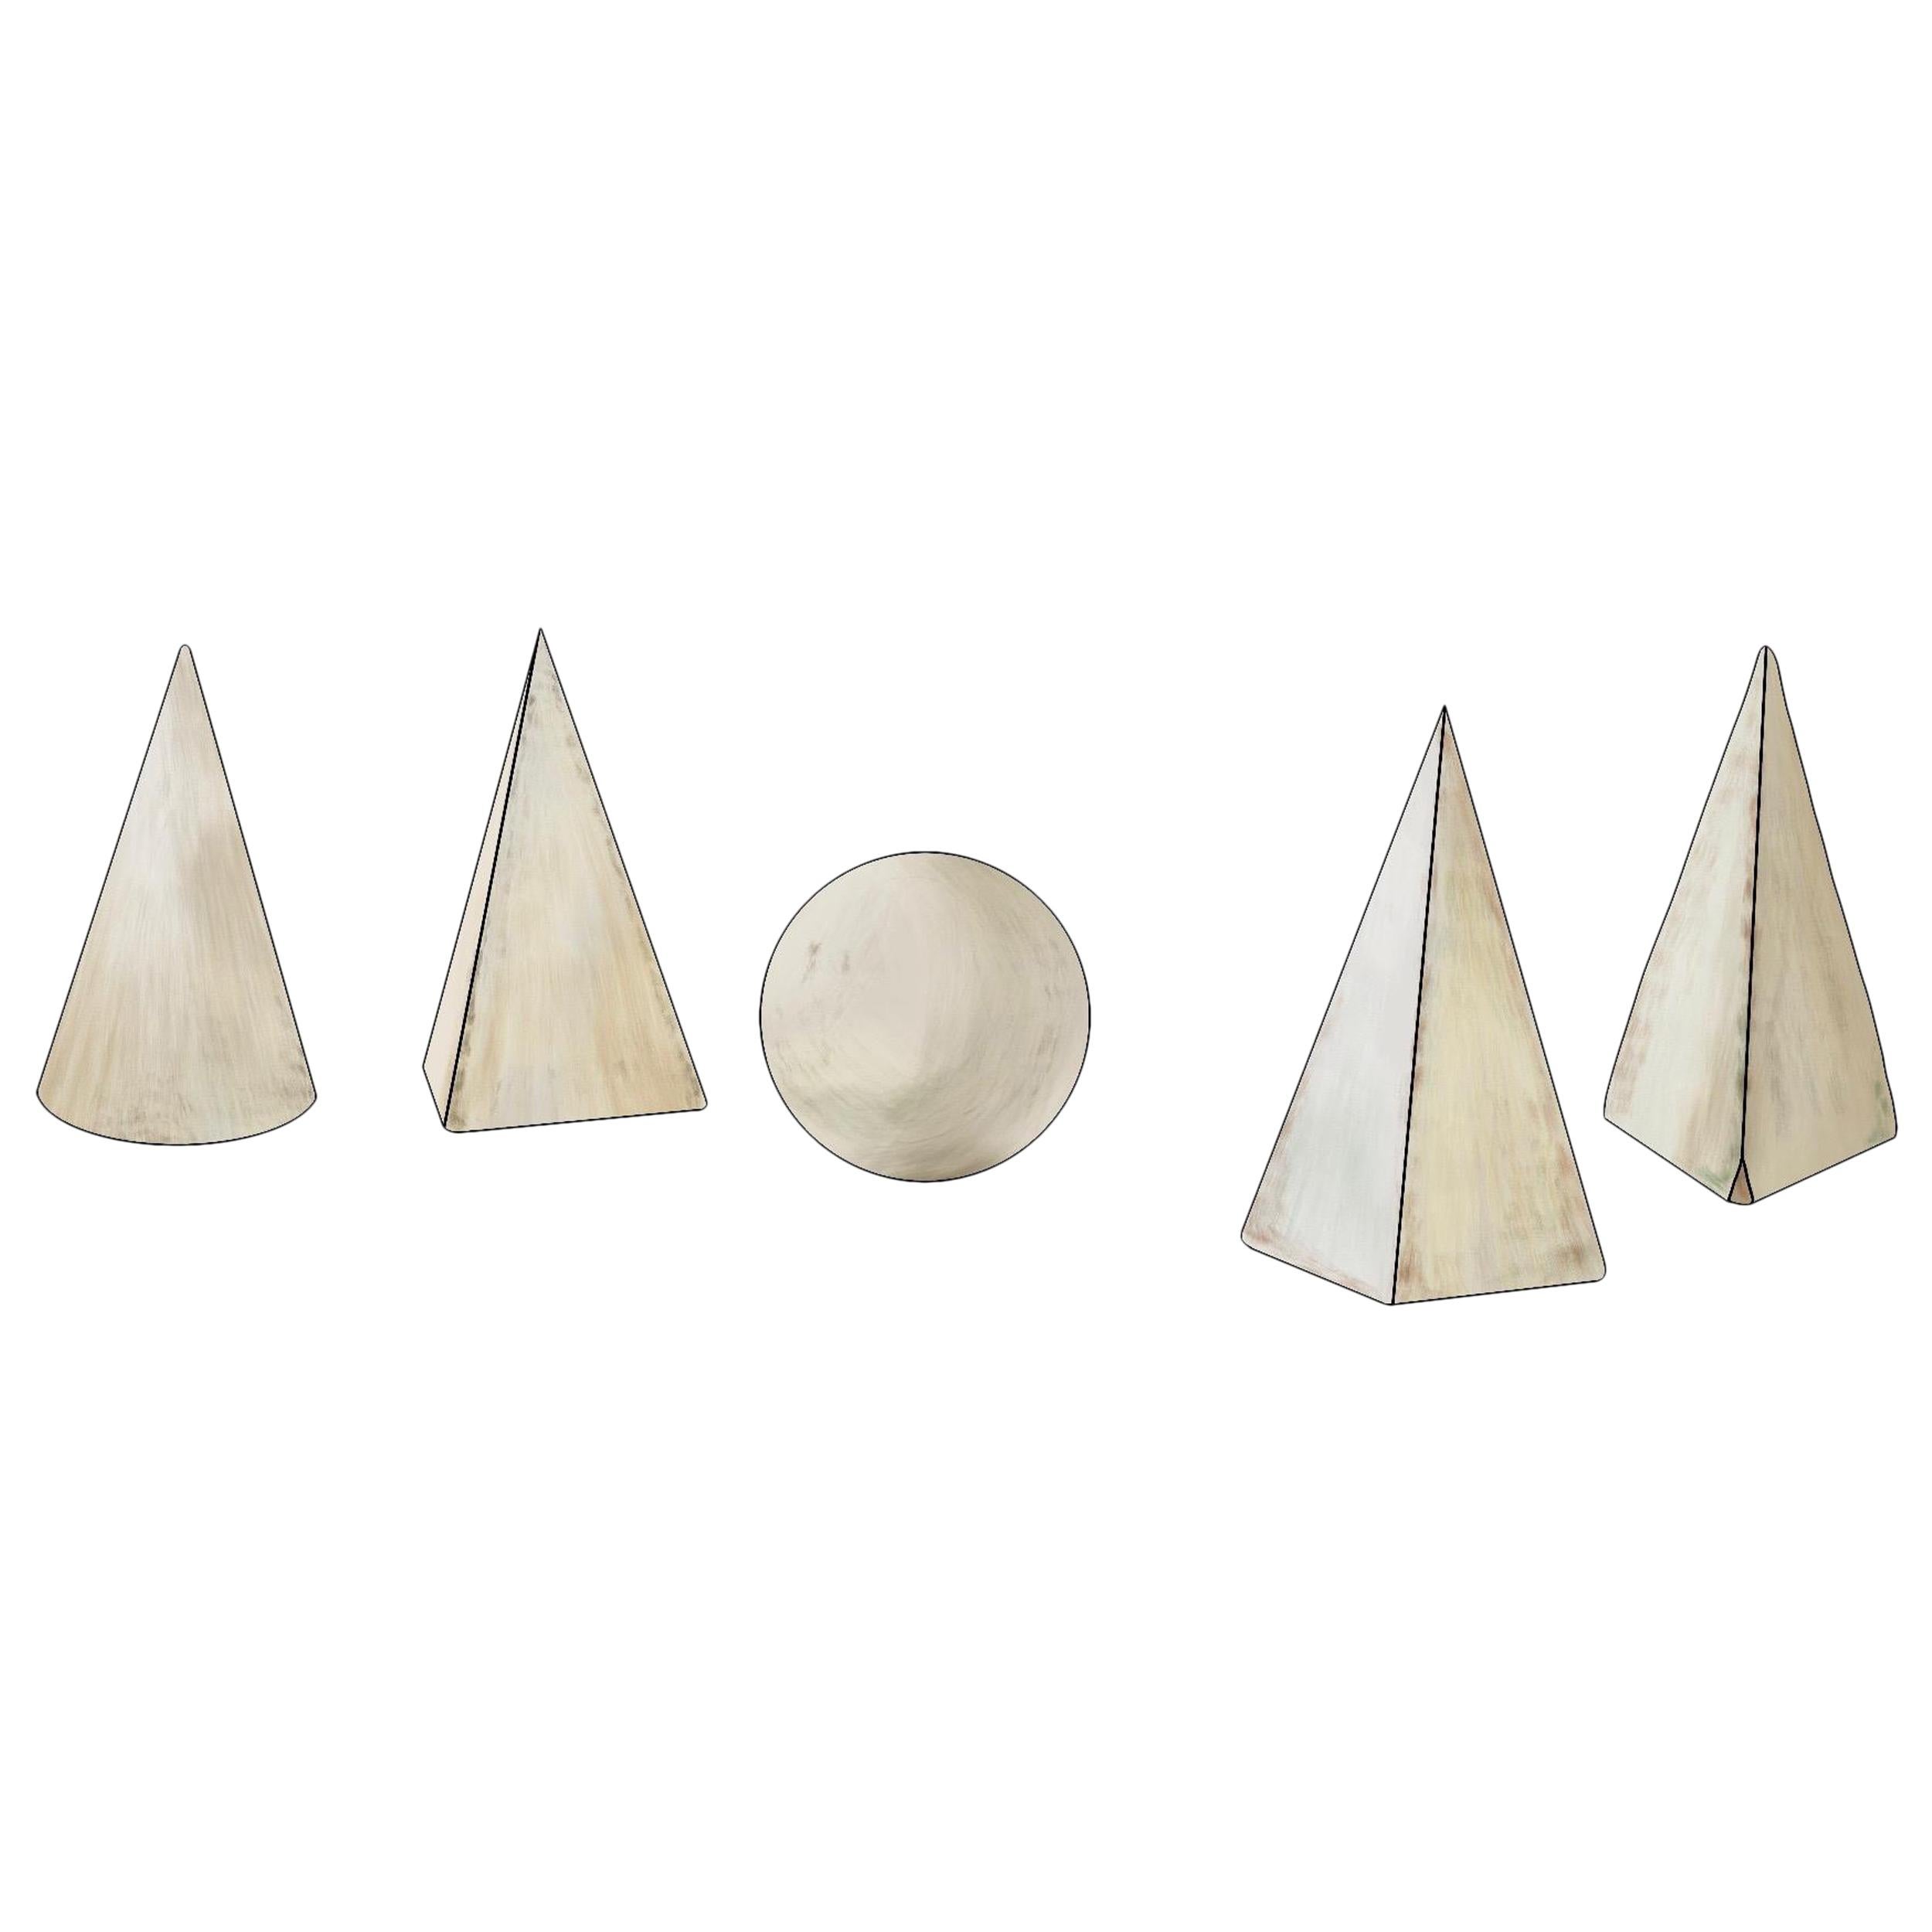 Set of 5 White Painted Wooden Geometric Molds